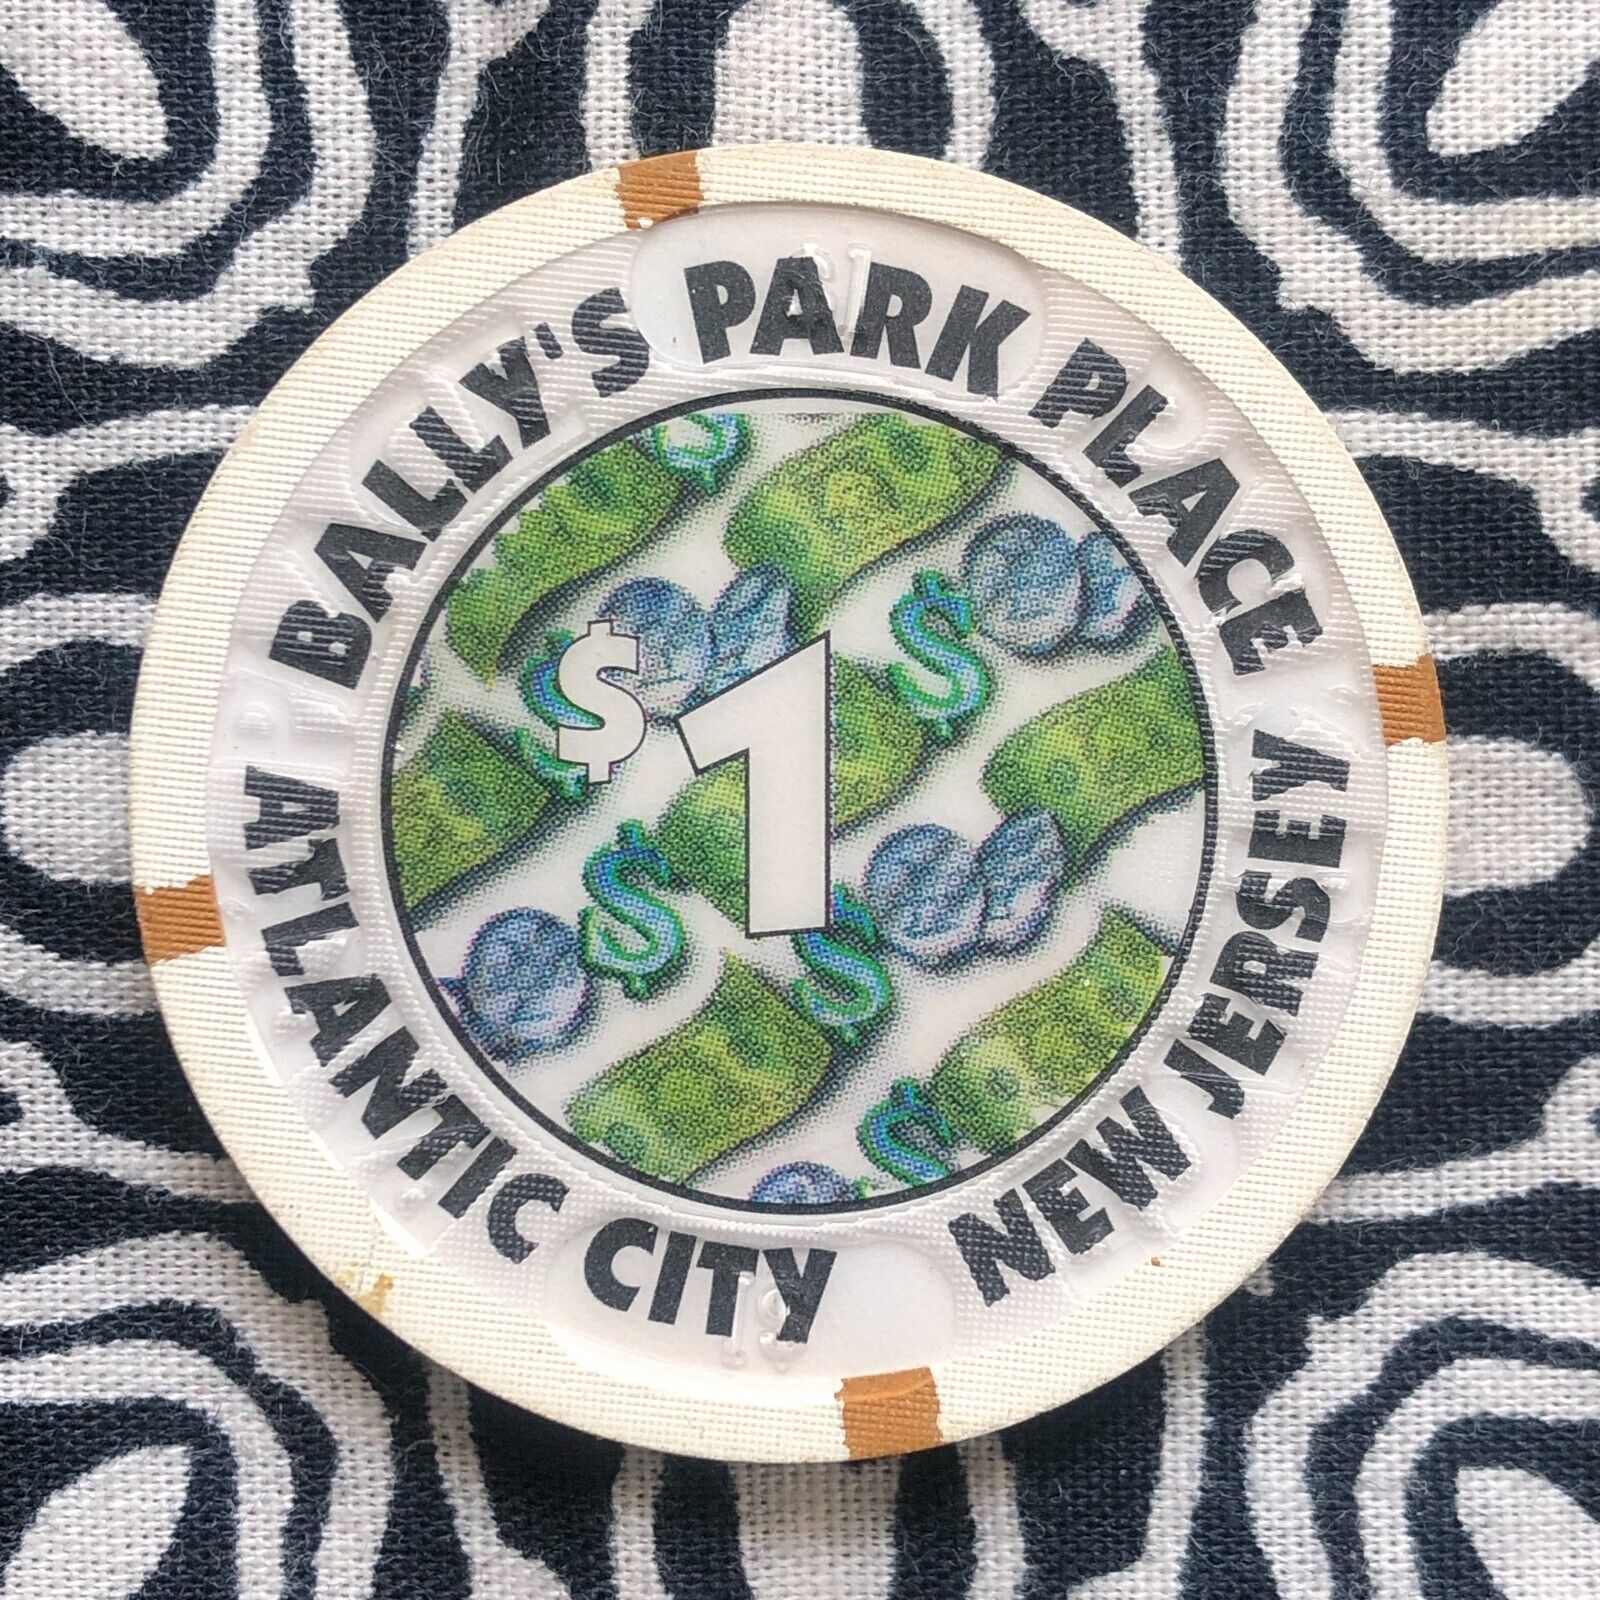 Bally's Park Place $1 Atlantic City, New Jersey Gaming Poker Casino Chip MB26